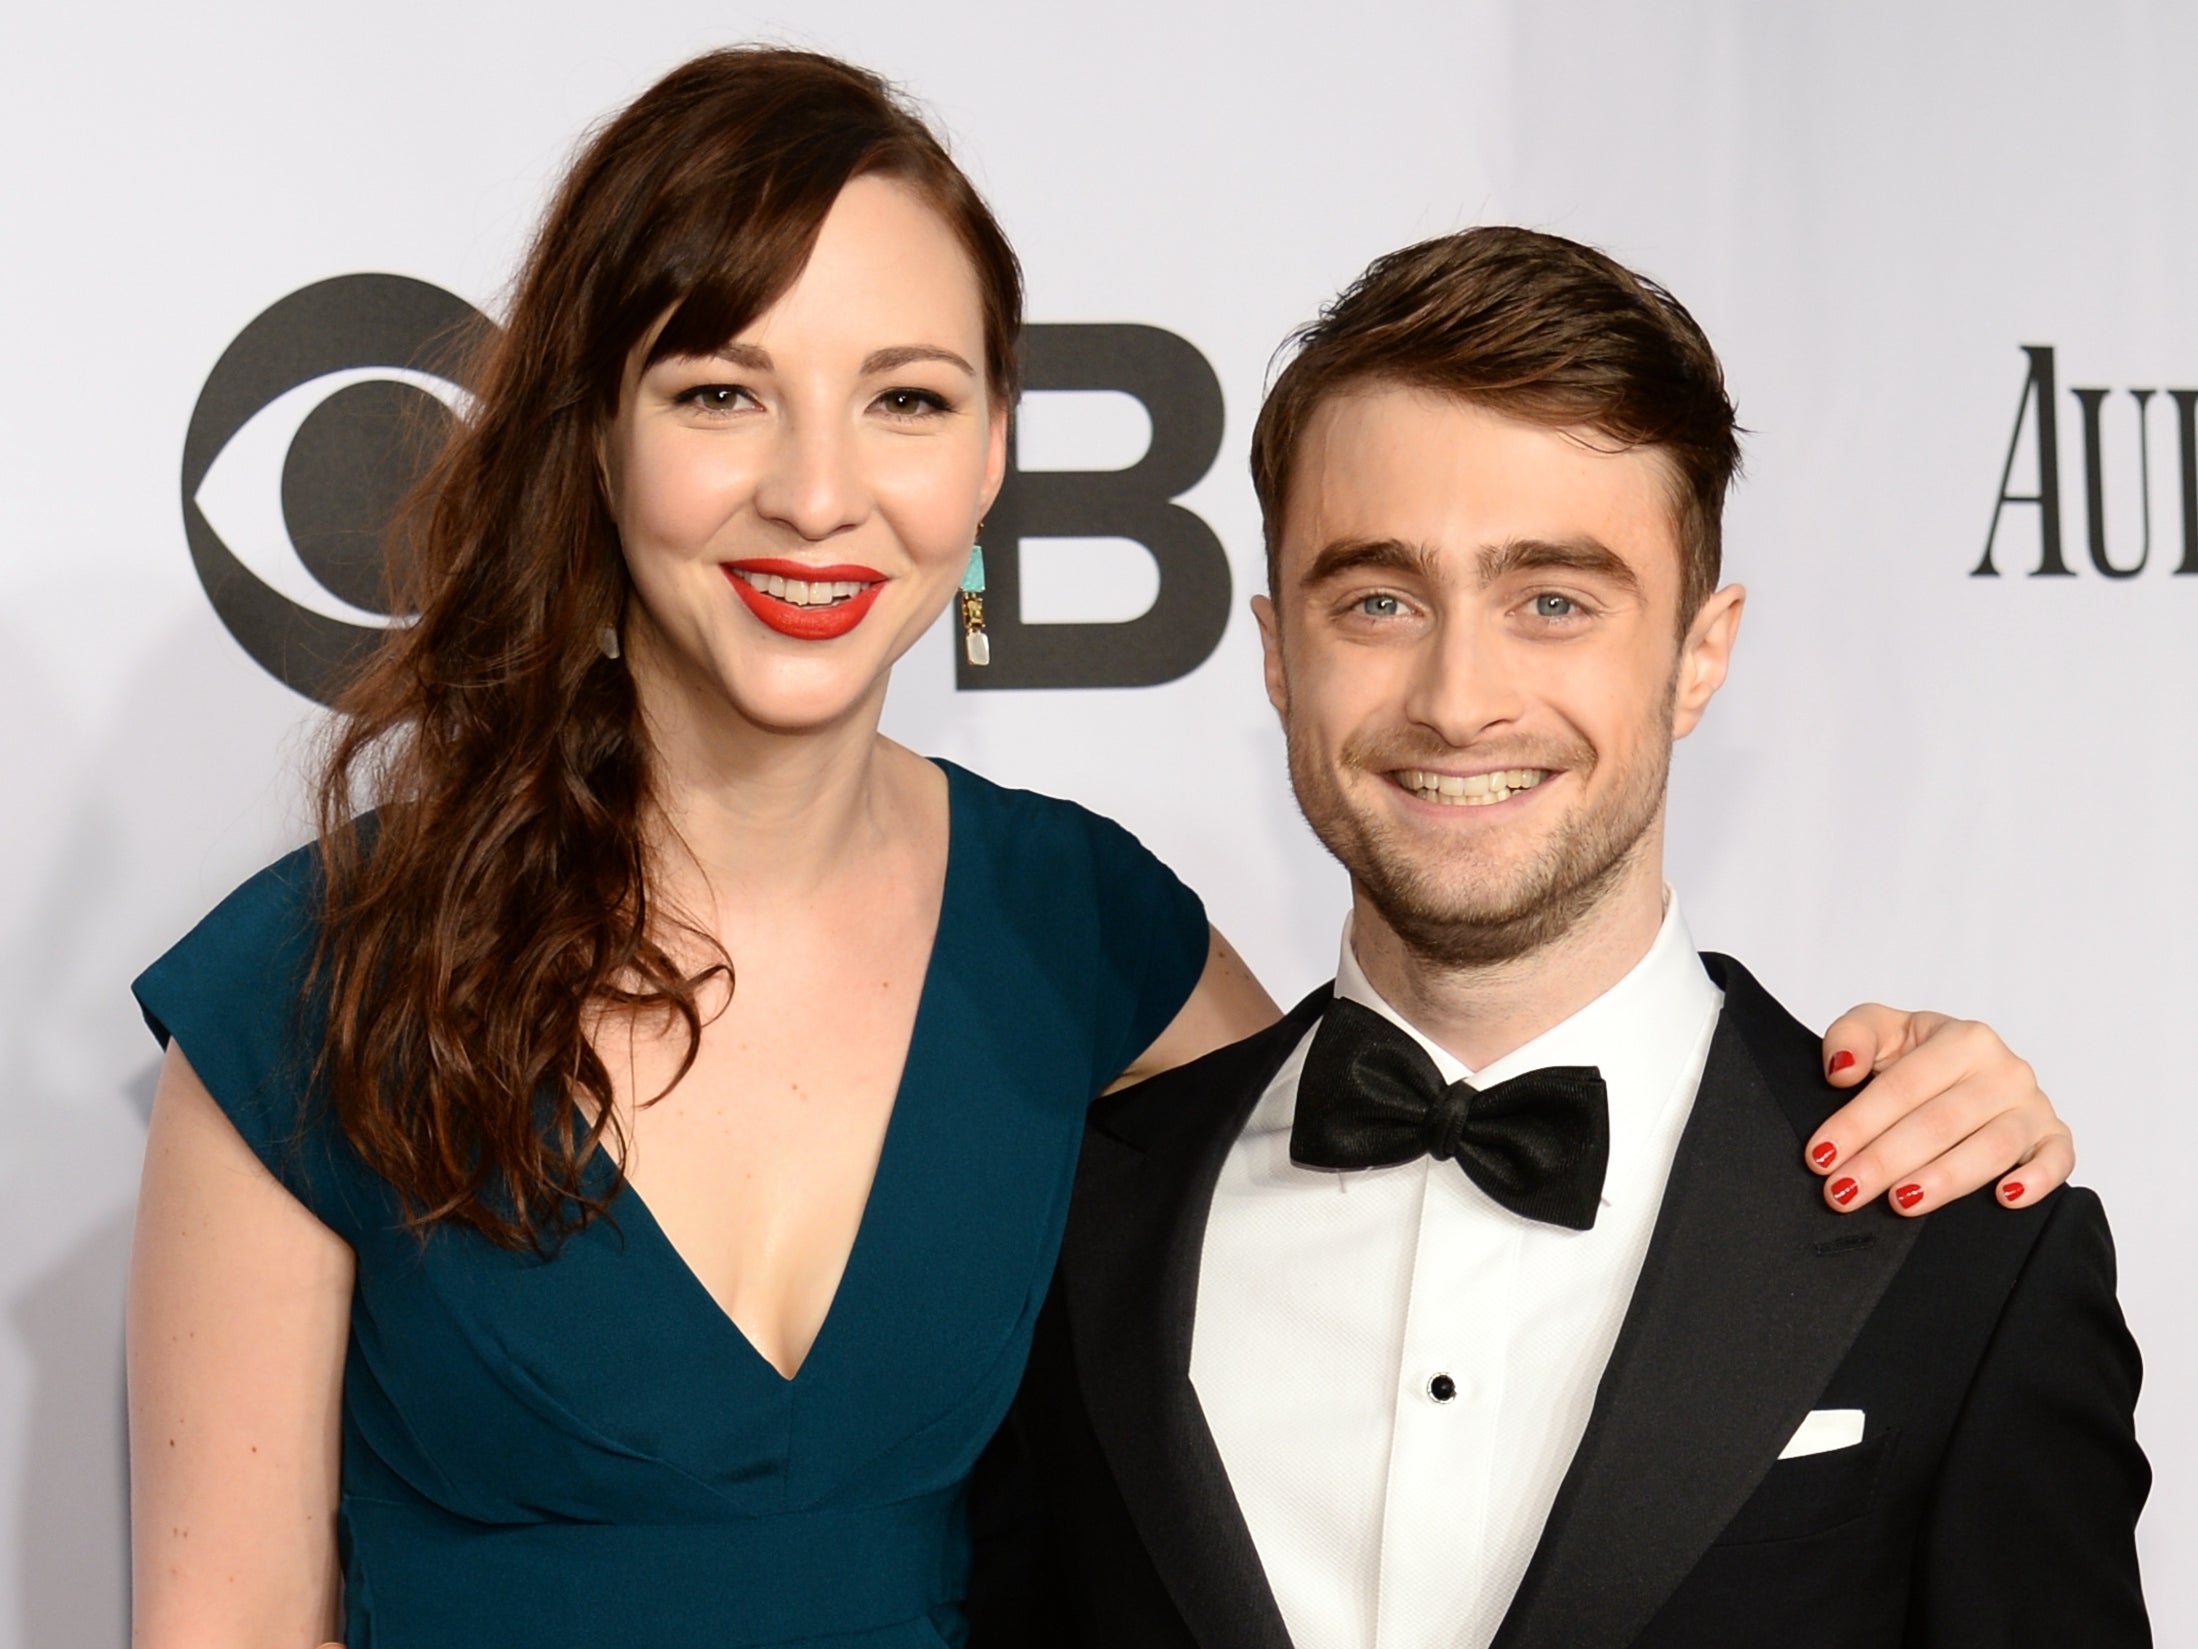 Daniel Radcliffe says hes really happy with girlfriend Erin Darke after almost 10 years together The Independent